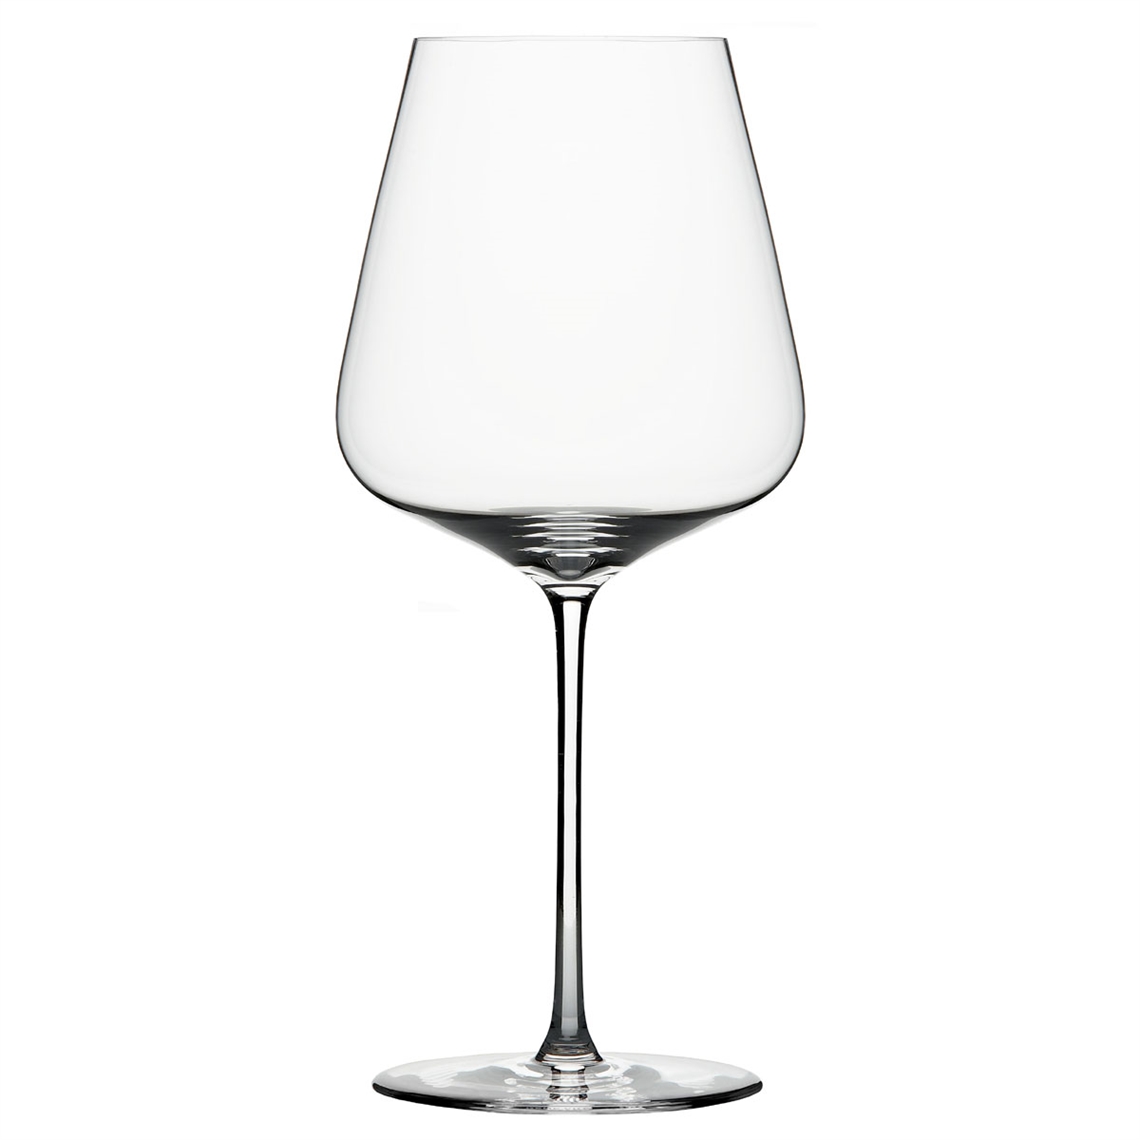 View more restaurant glasses - riedel from our Premium Mouth Blown Glassware range